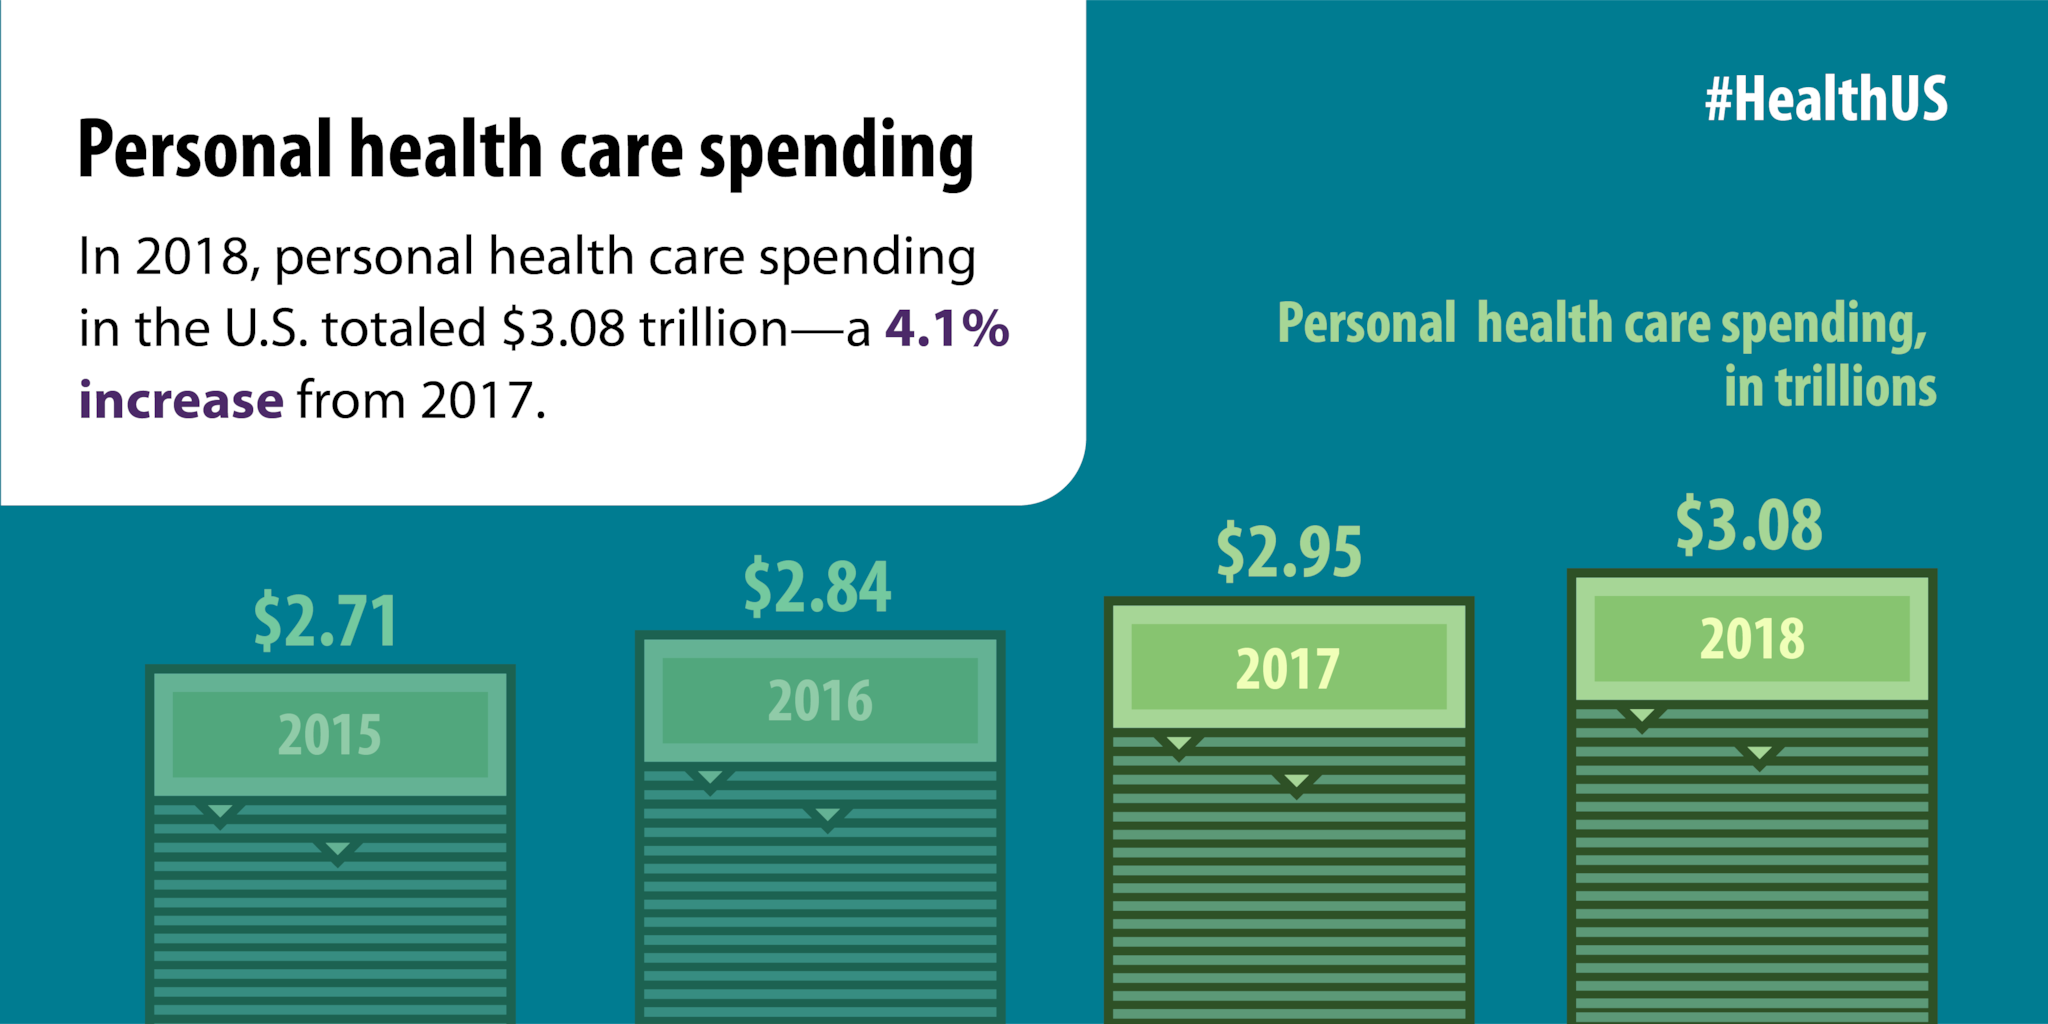 In 2018, personal health care spending in the U.S. totaled $3.08 trillion - a 4.1% increase from 2017.